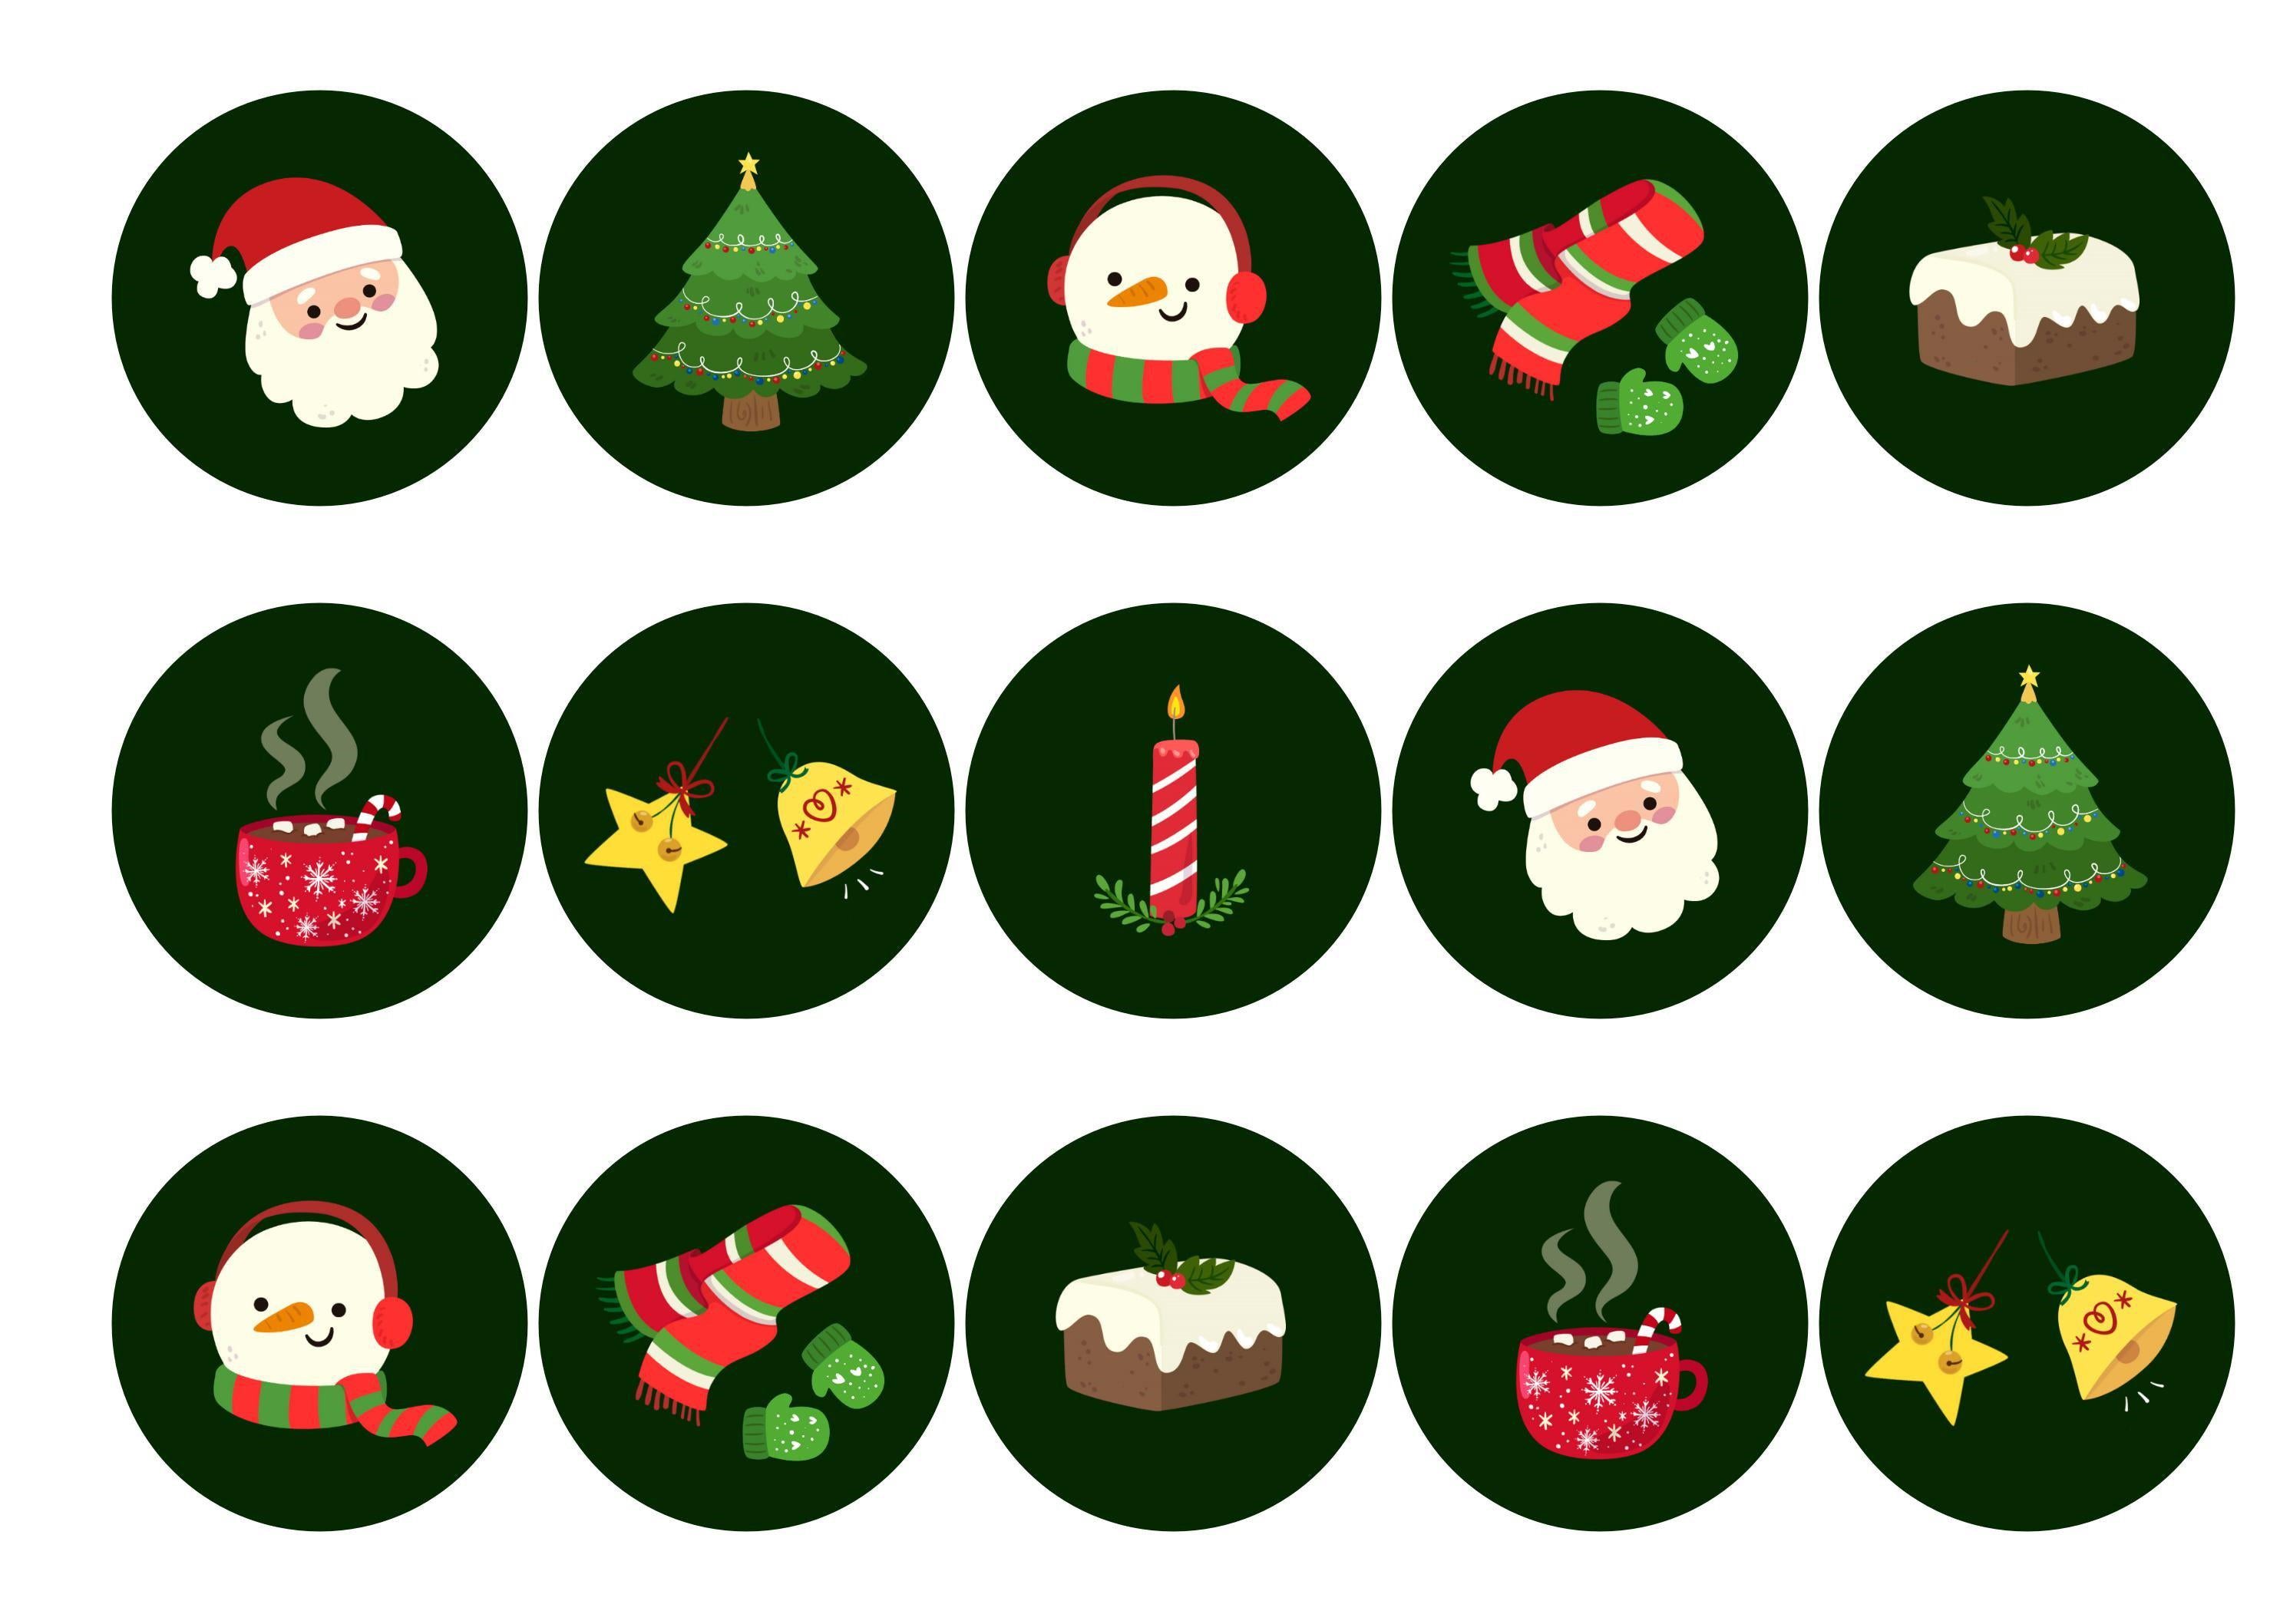 15 Christmas toppers with a range of Christmas icons